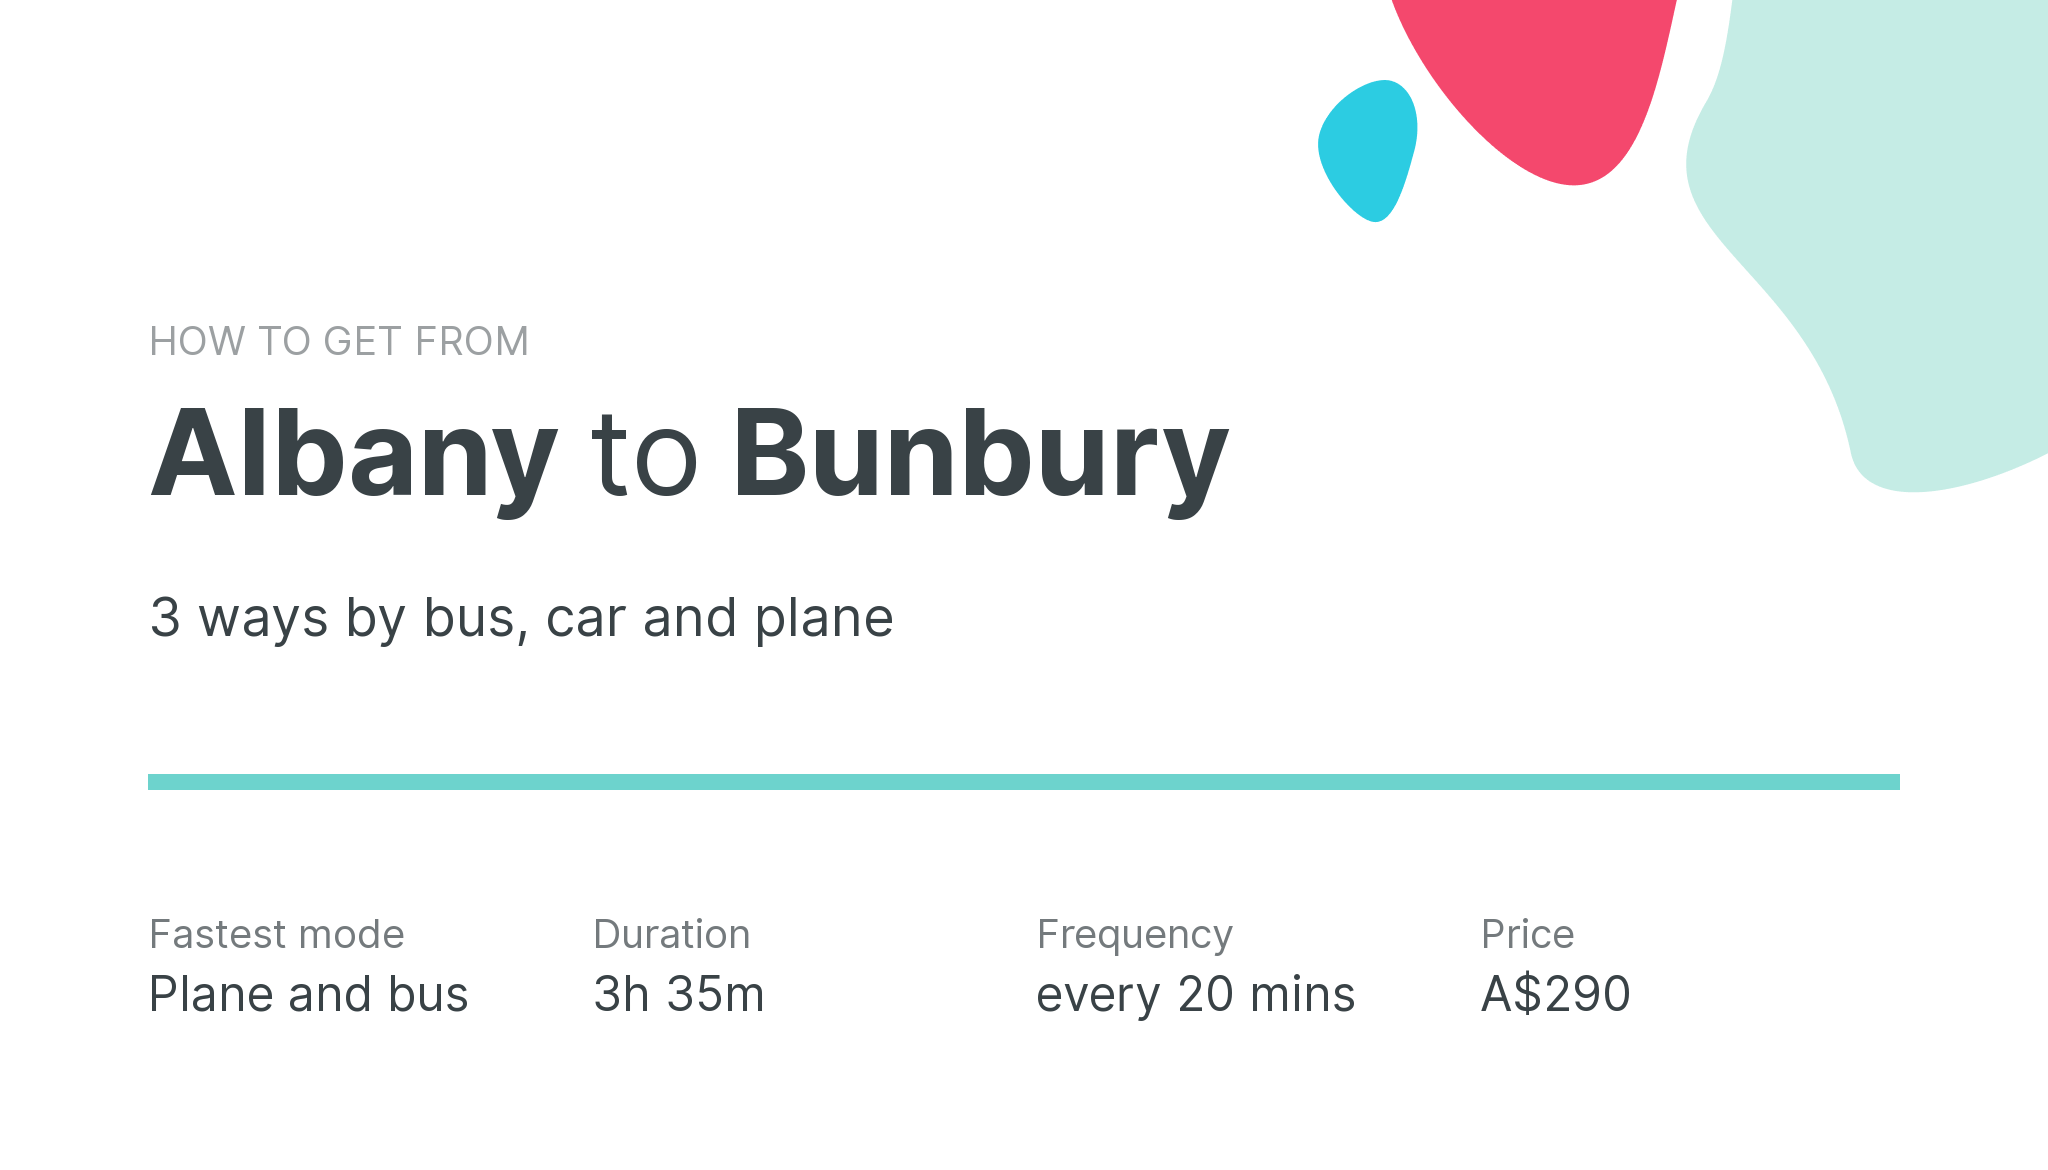 How do I get from Albany to Bunbury